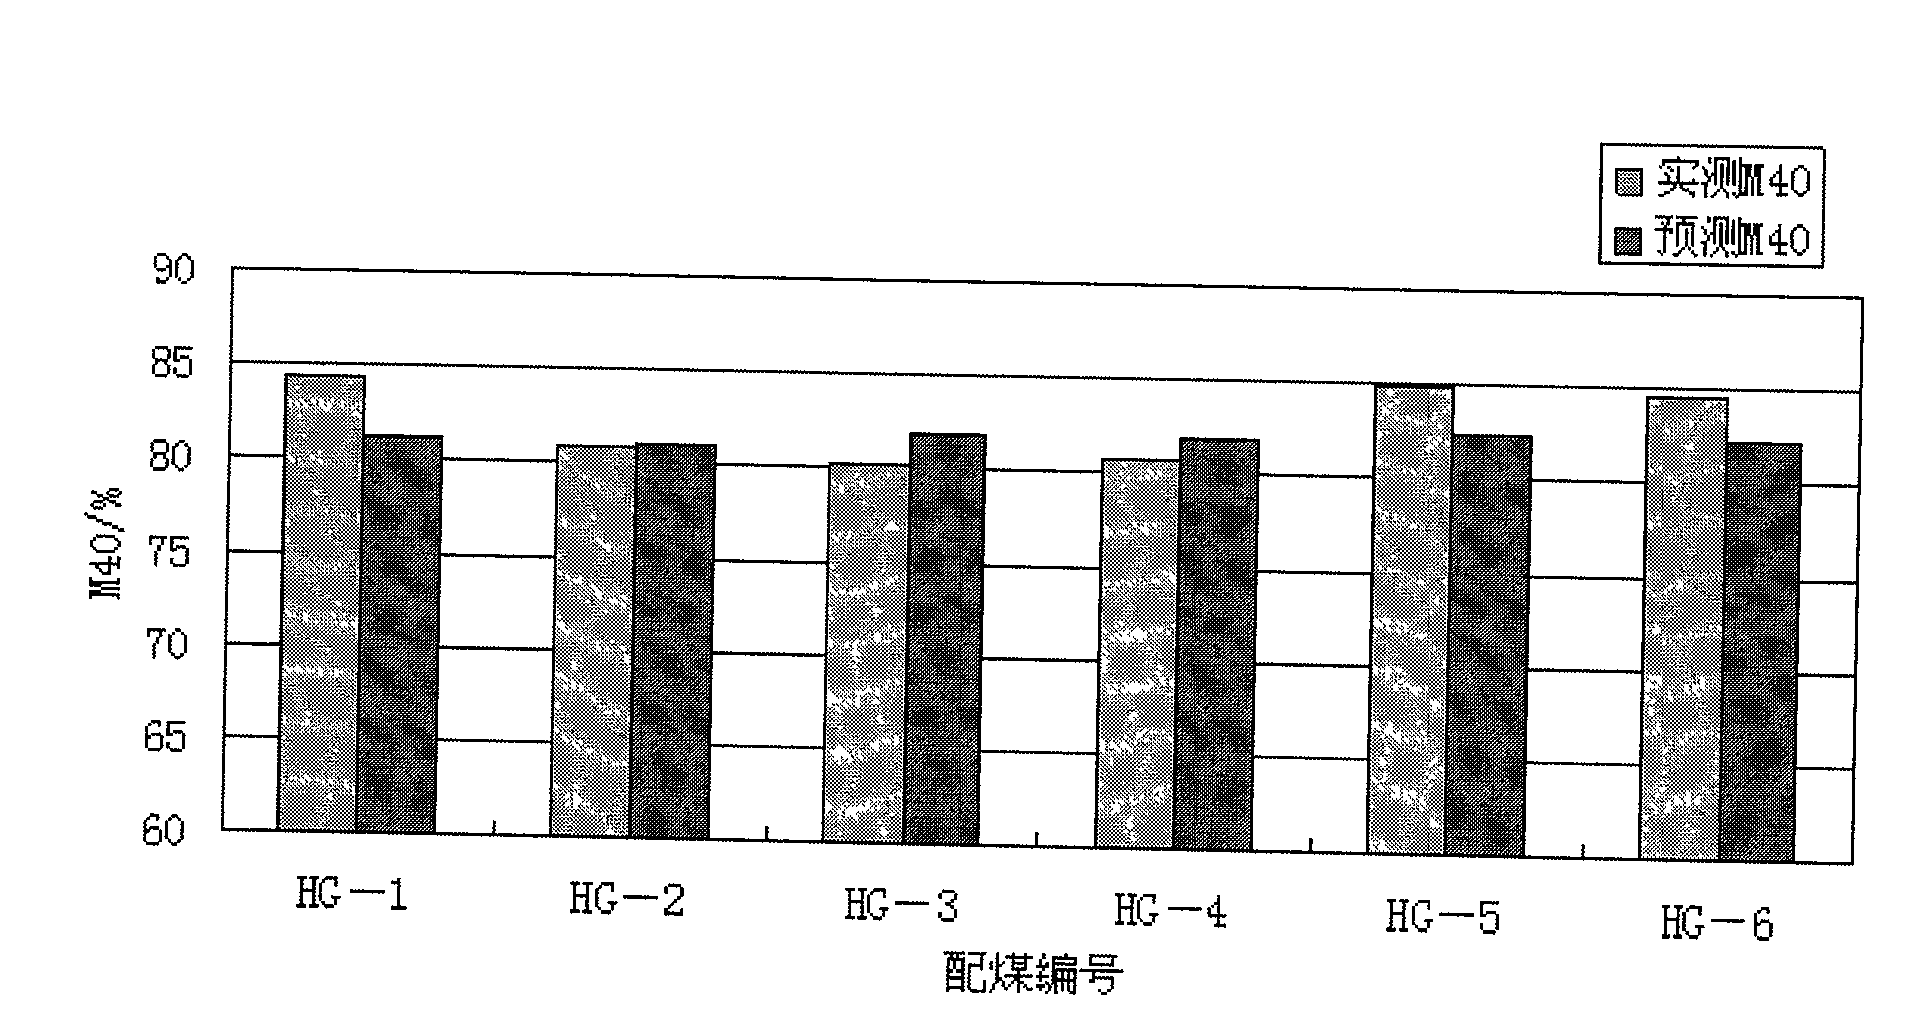 Method for predicting mechanical strength and thermal properties of coke